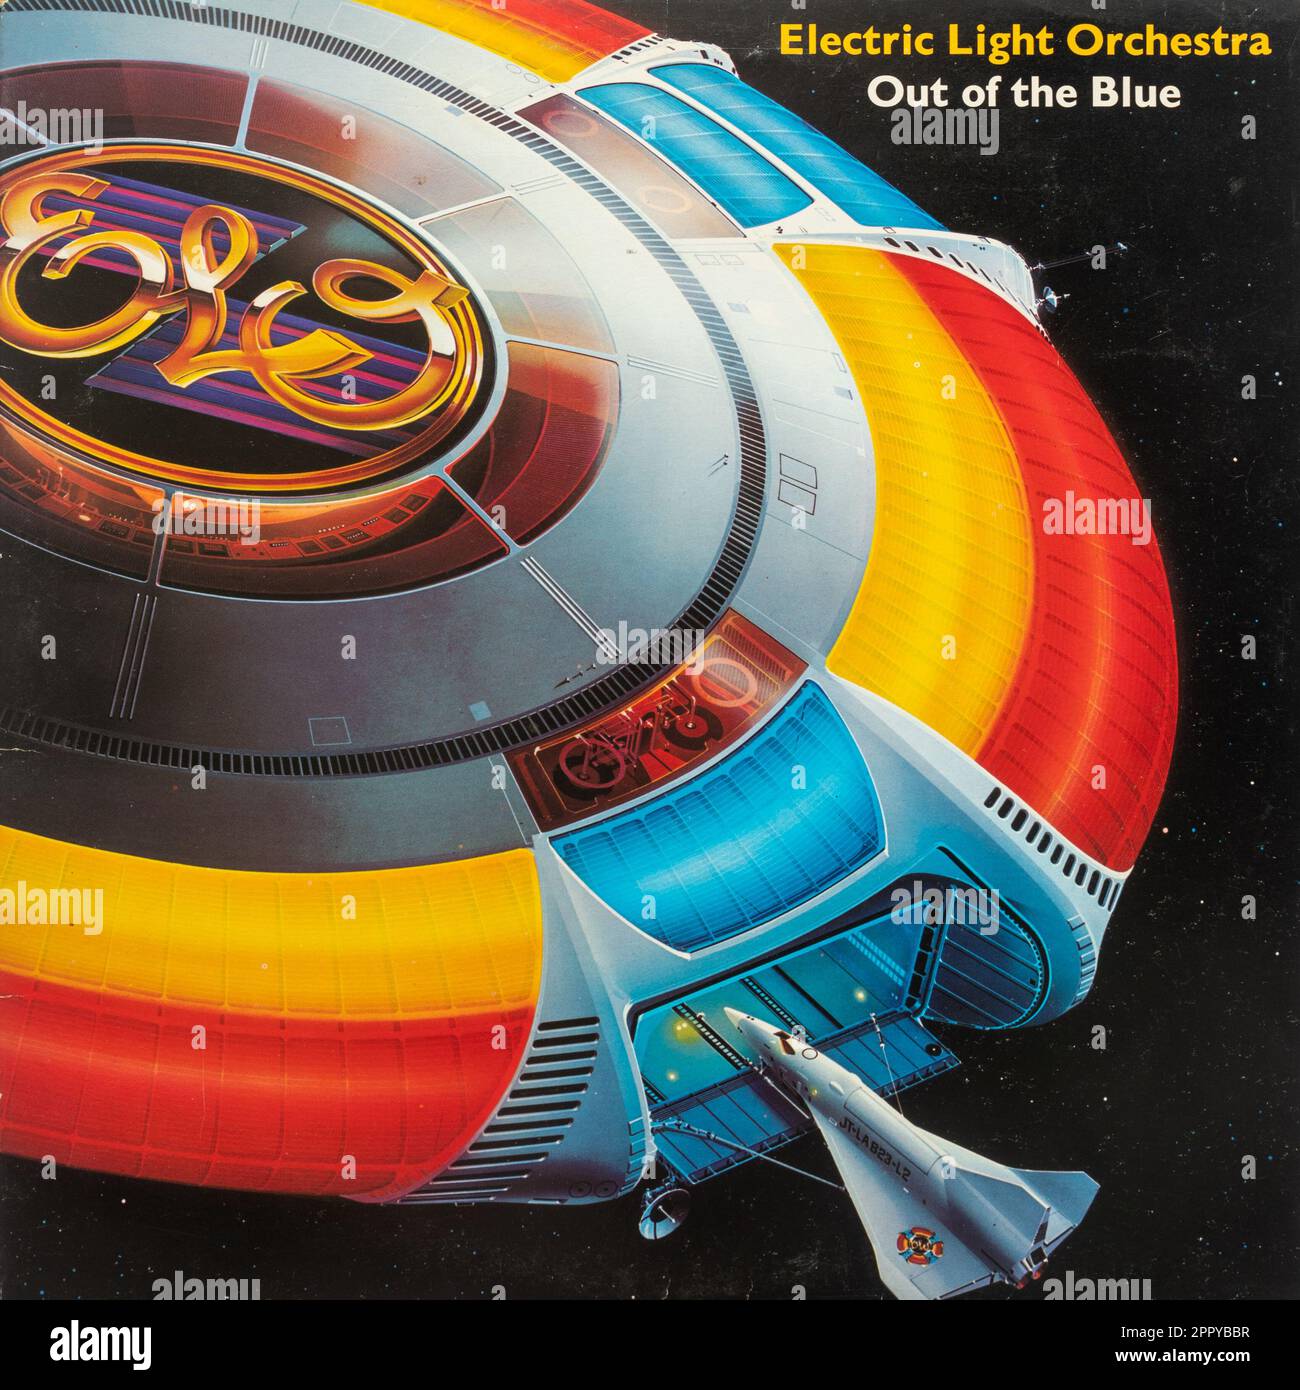 Out of the Blue vinyl album cover by Electric Light Orchestra (ELO), British rock group Stock Photo